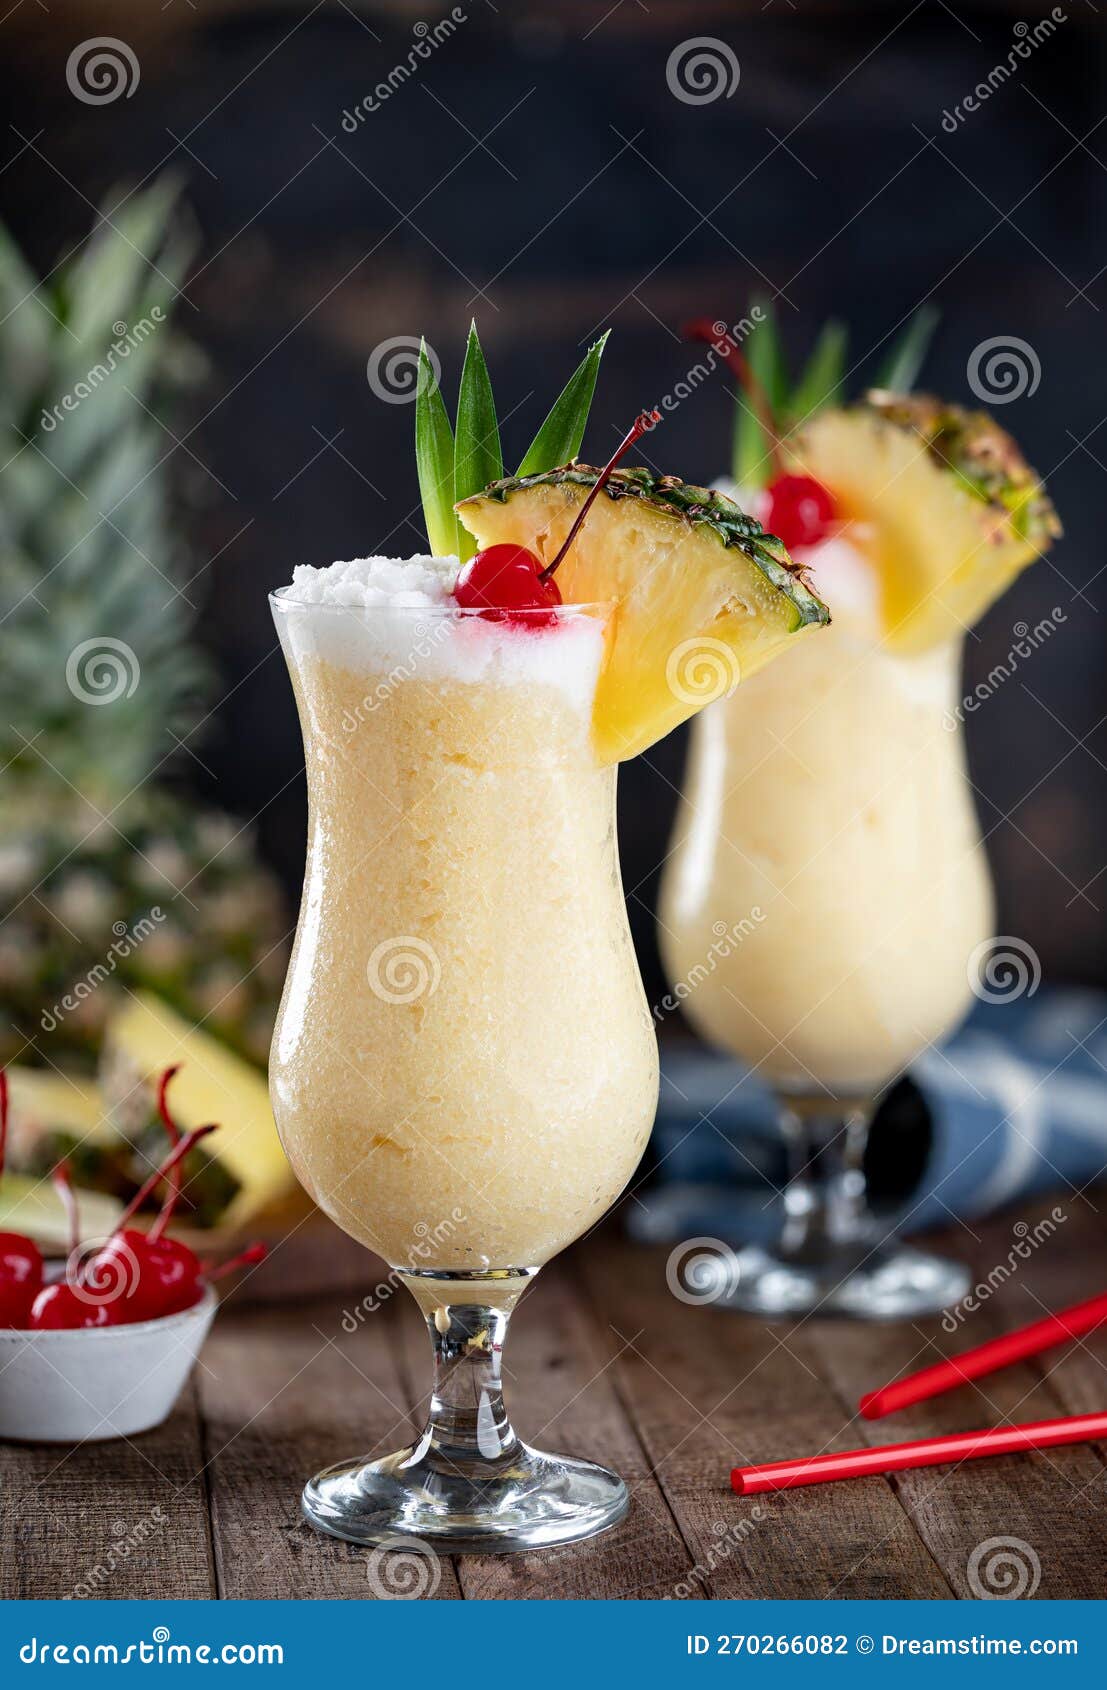 pina colada cocktail with cherry, pineapple and leaves